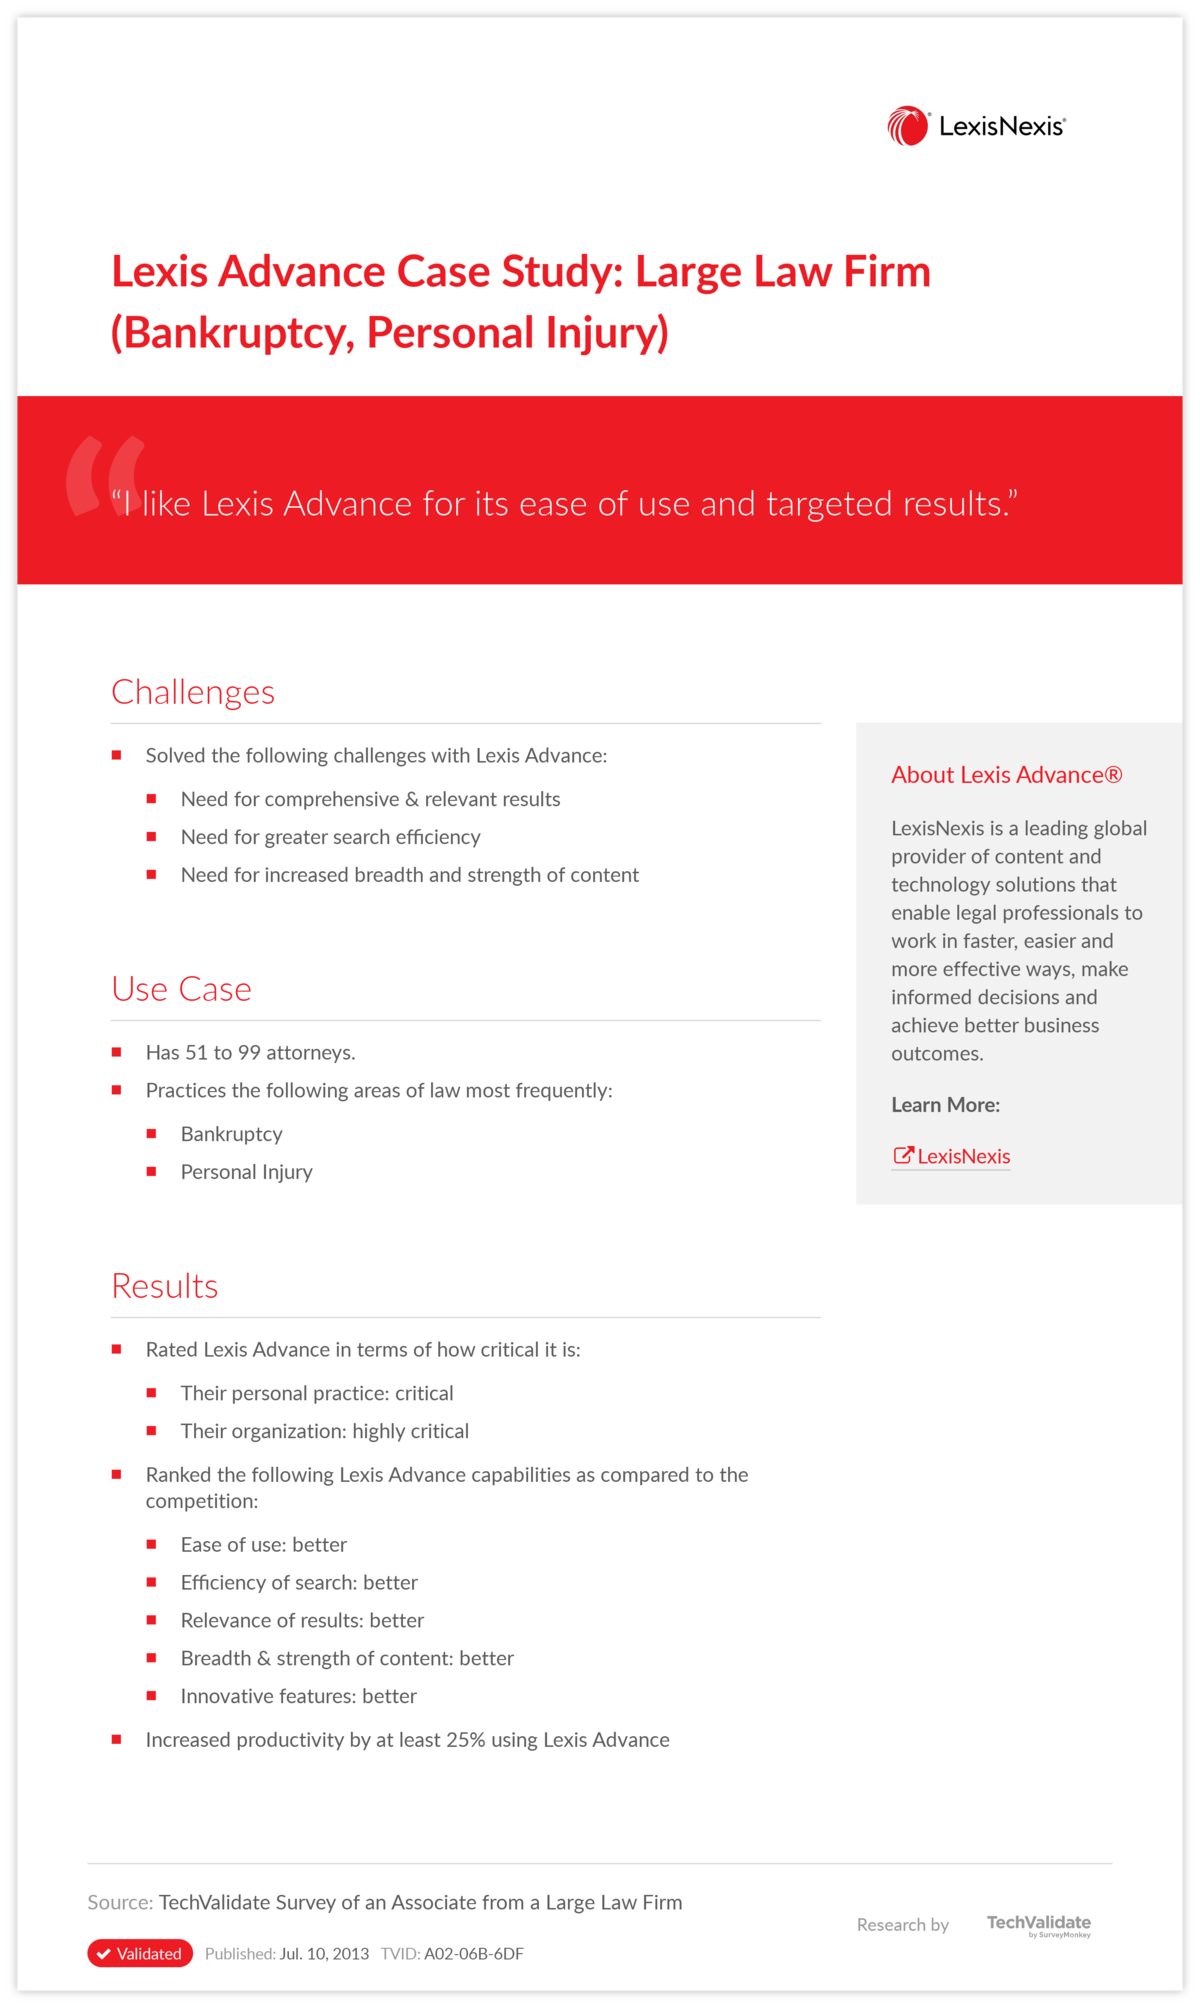 Lexis Advance Case Study: Large Law Firm (Bankruptcy, Personal Injury)